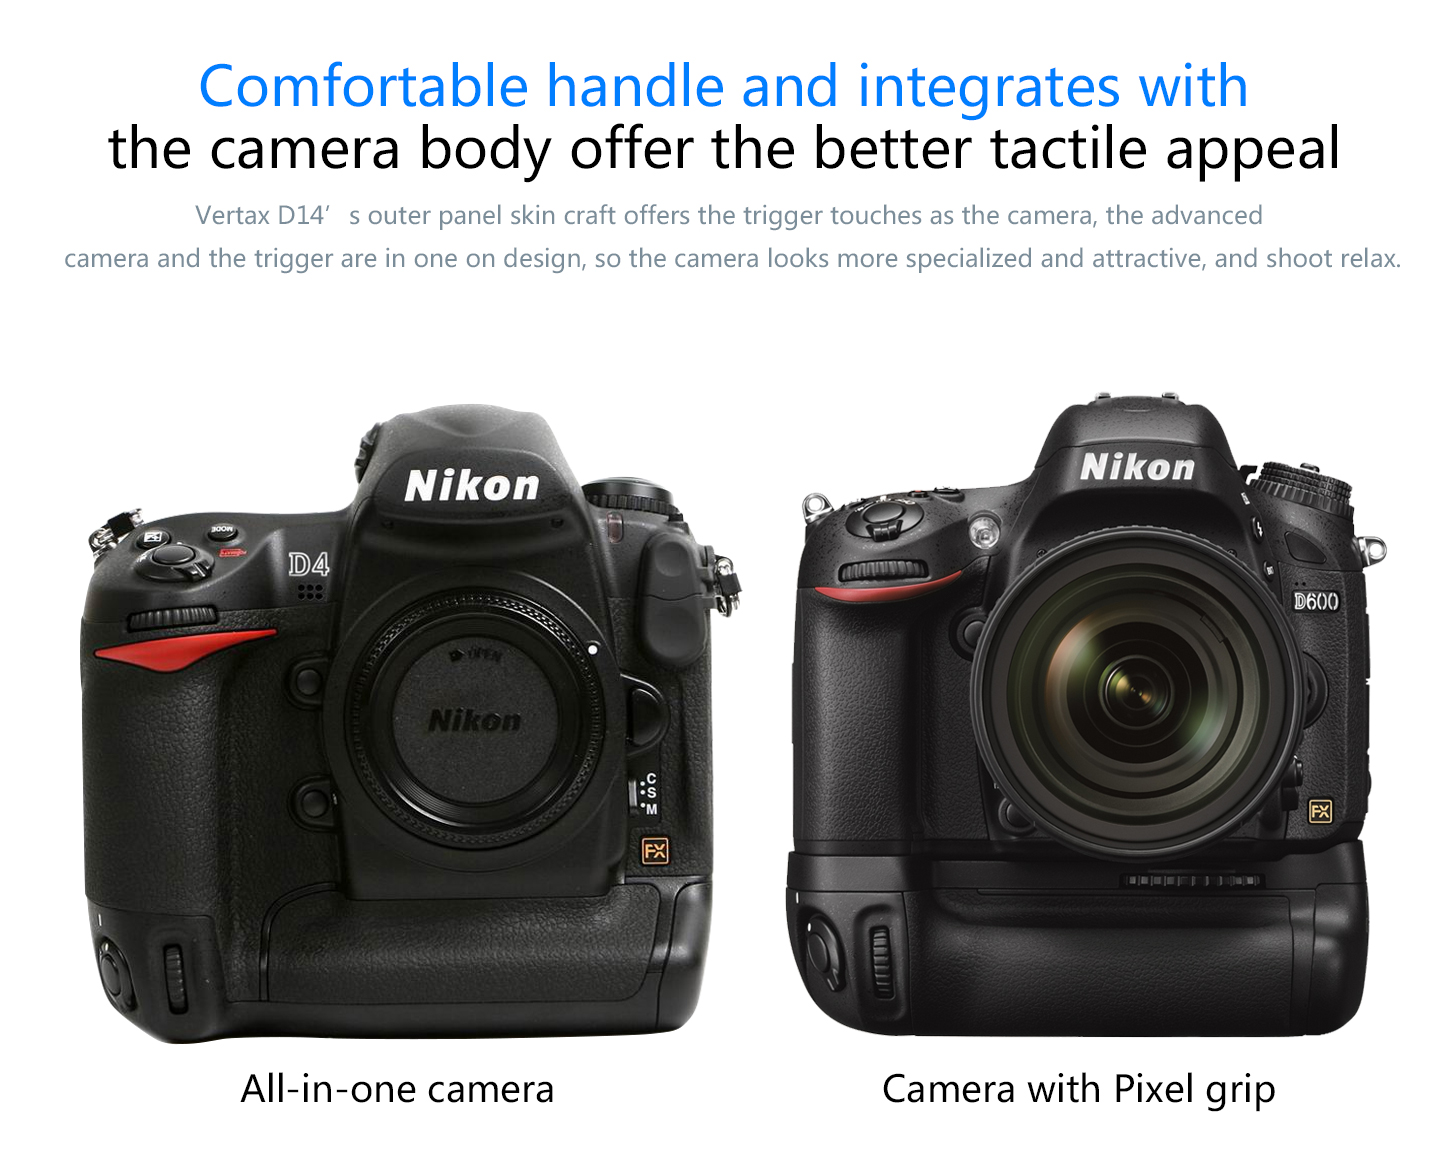 Comfortable handle and integrates with the camera body offer the better tactile appeal